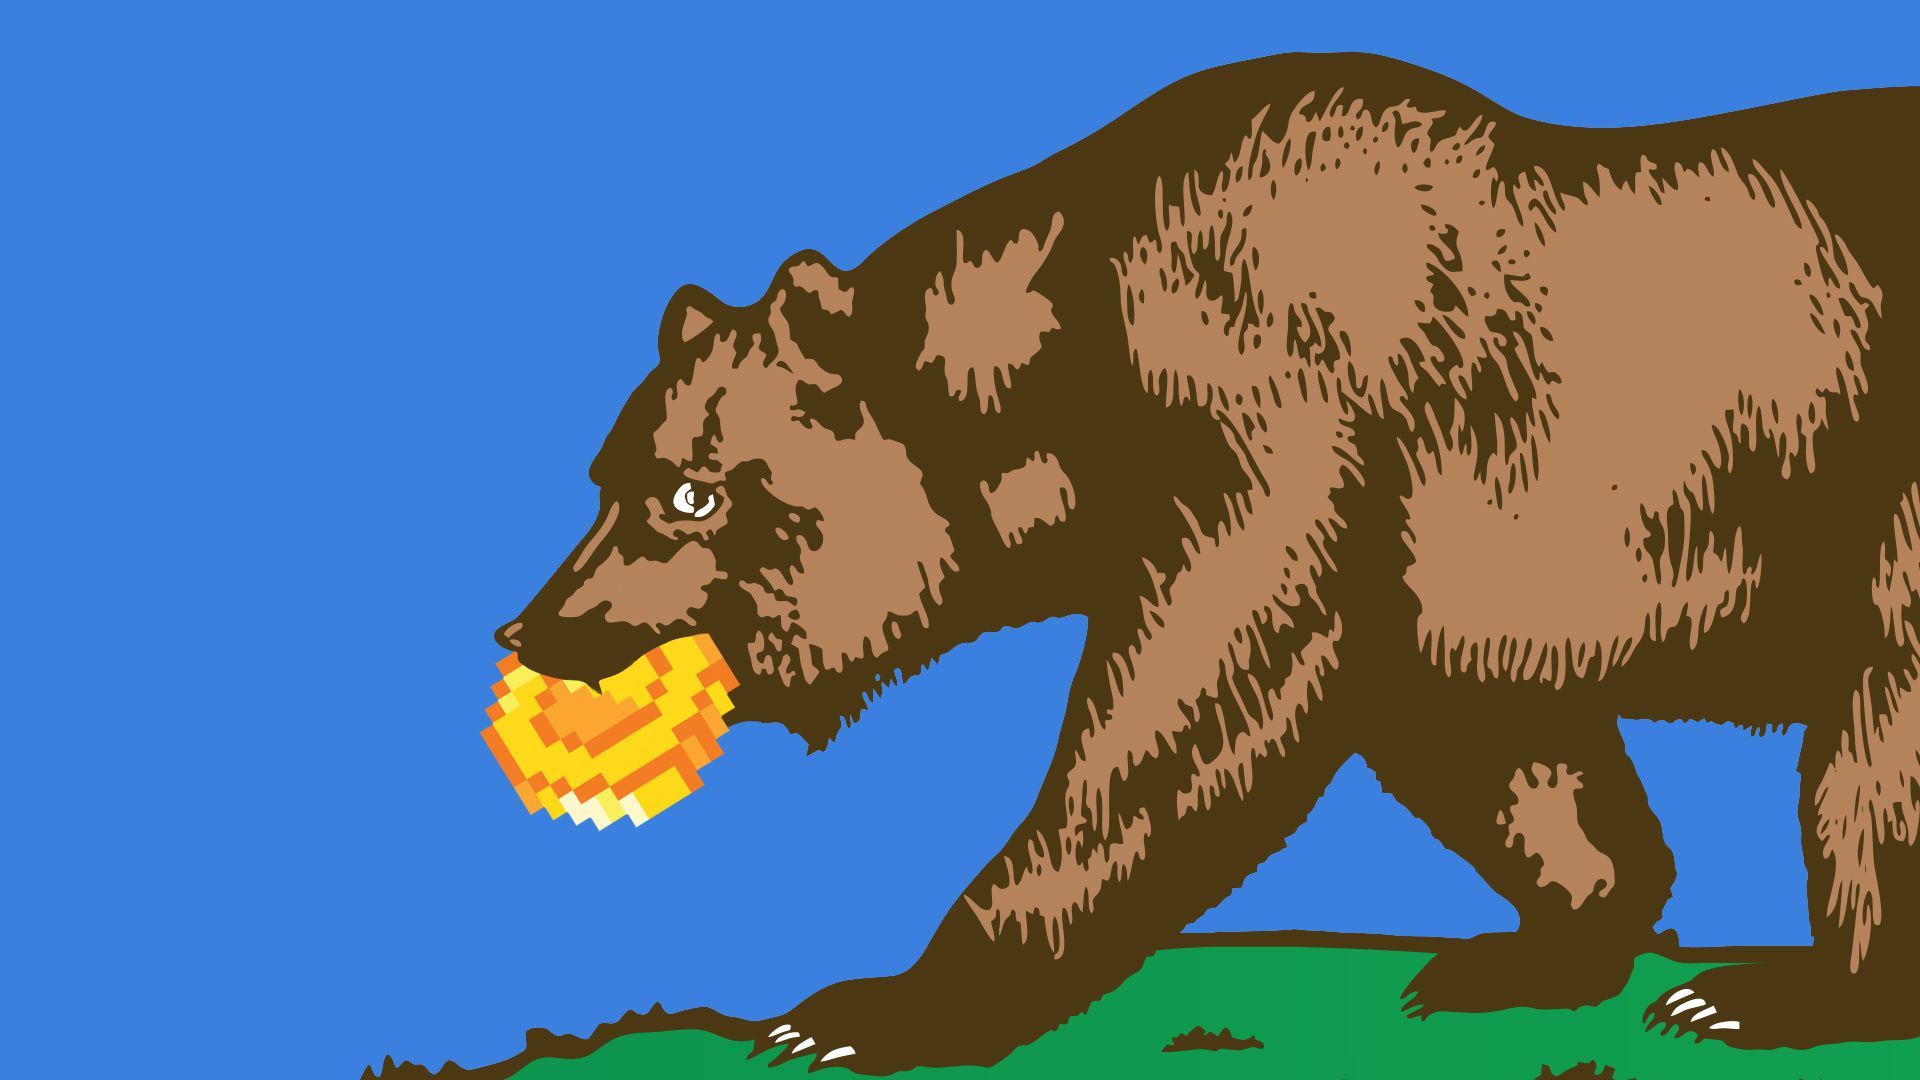 Illustration of a bear holding a pixel coin in its mouth